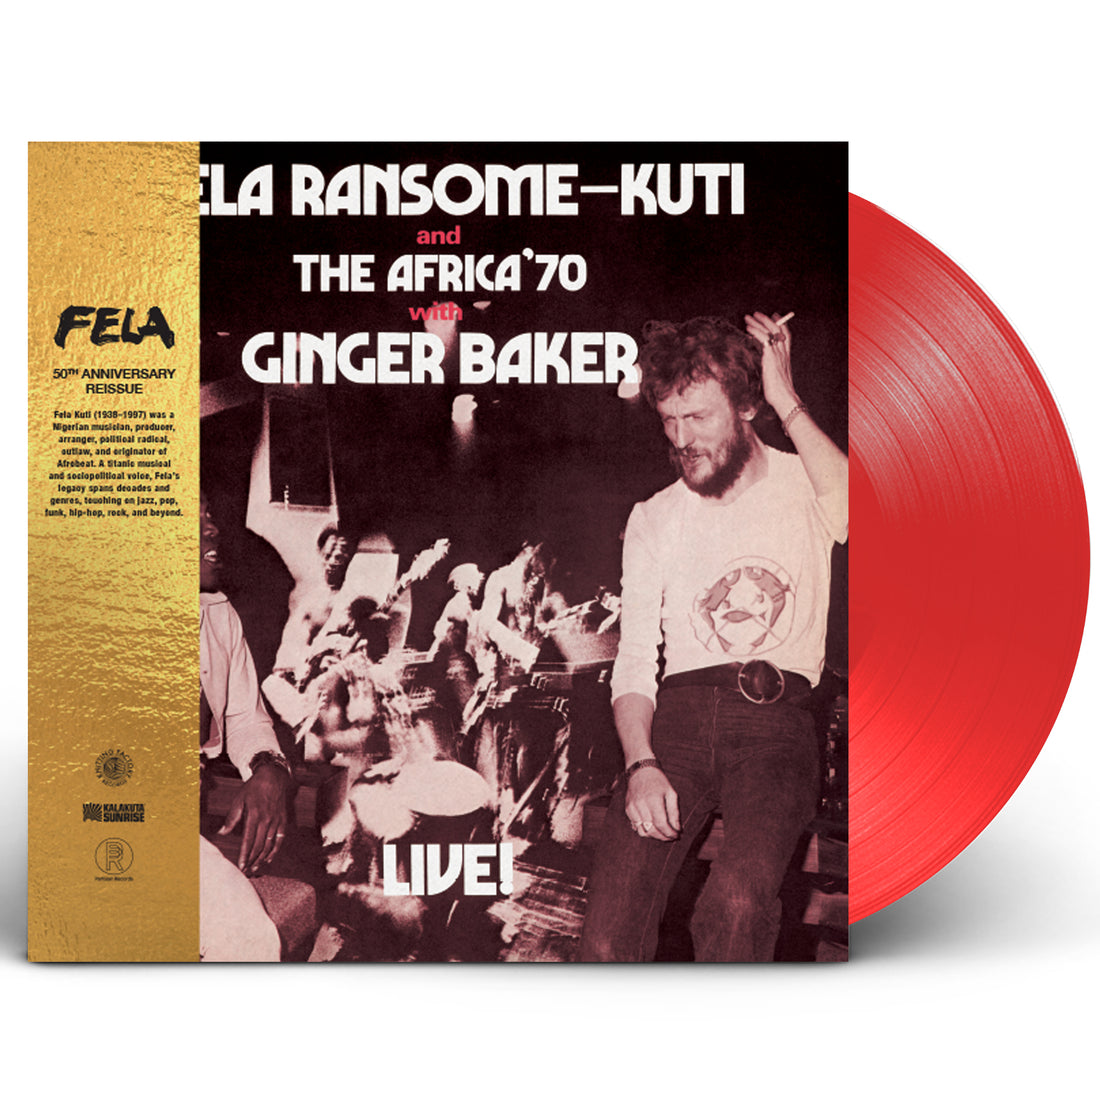 Fela Kuti and The Africa 70 with Ginger Baker "Live!" 50th Anniversary 2xLP Red Vinyl